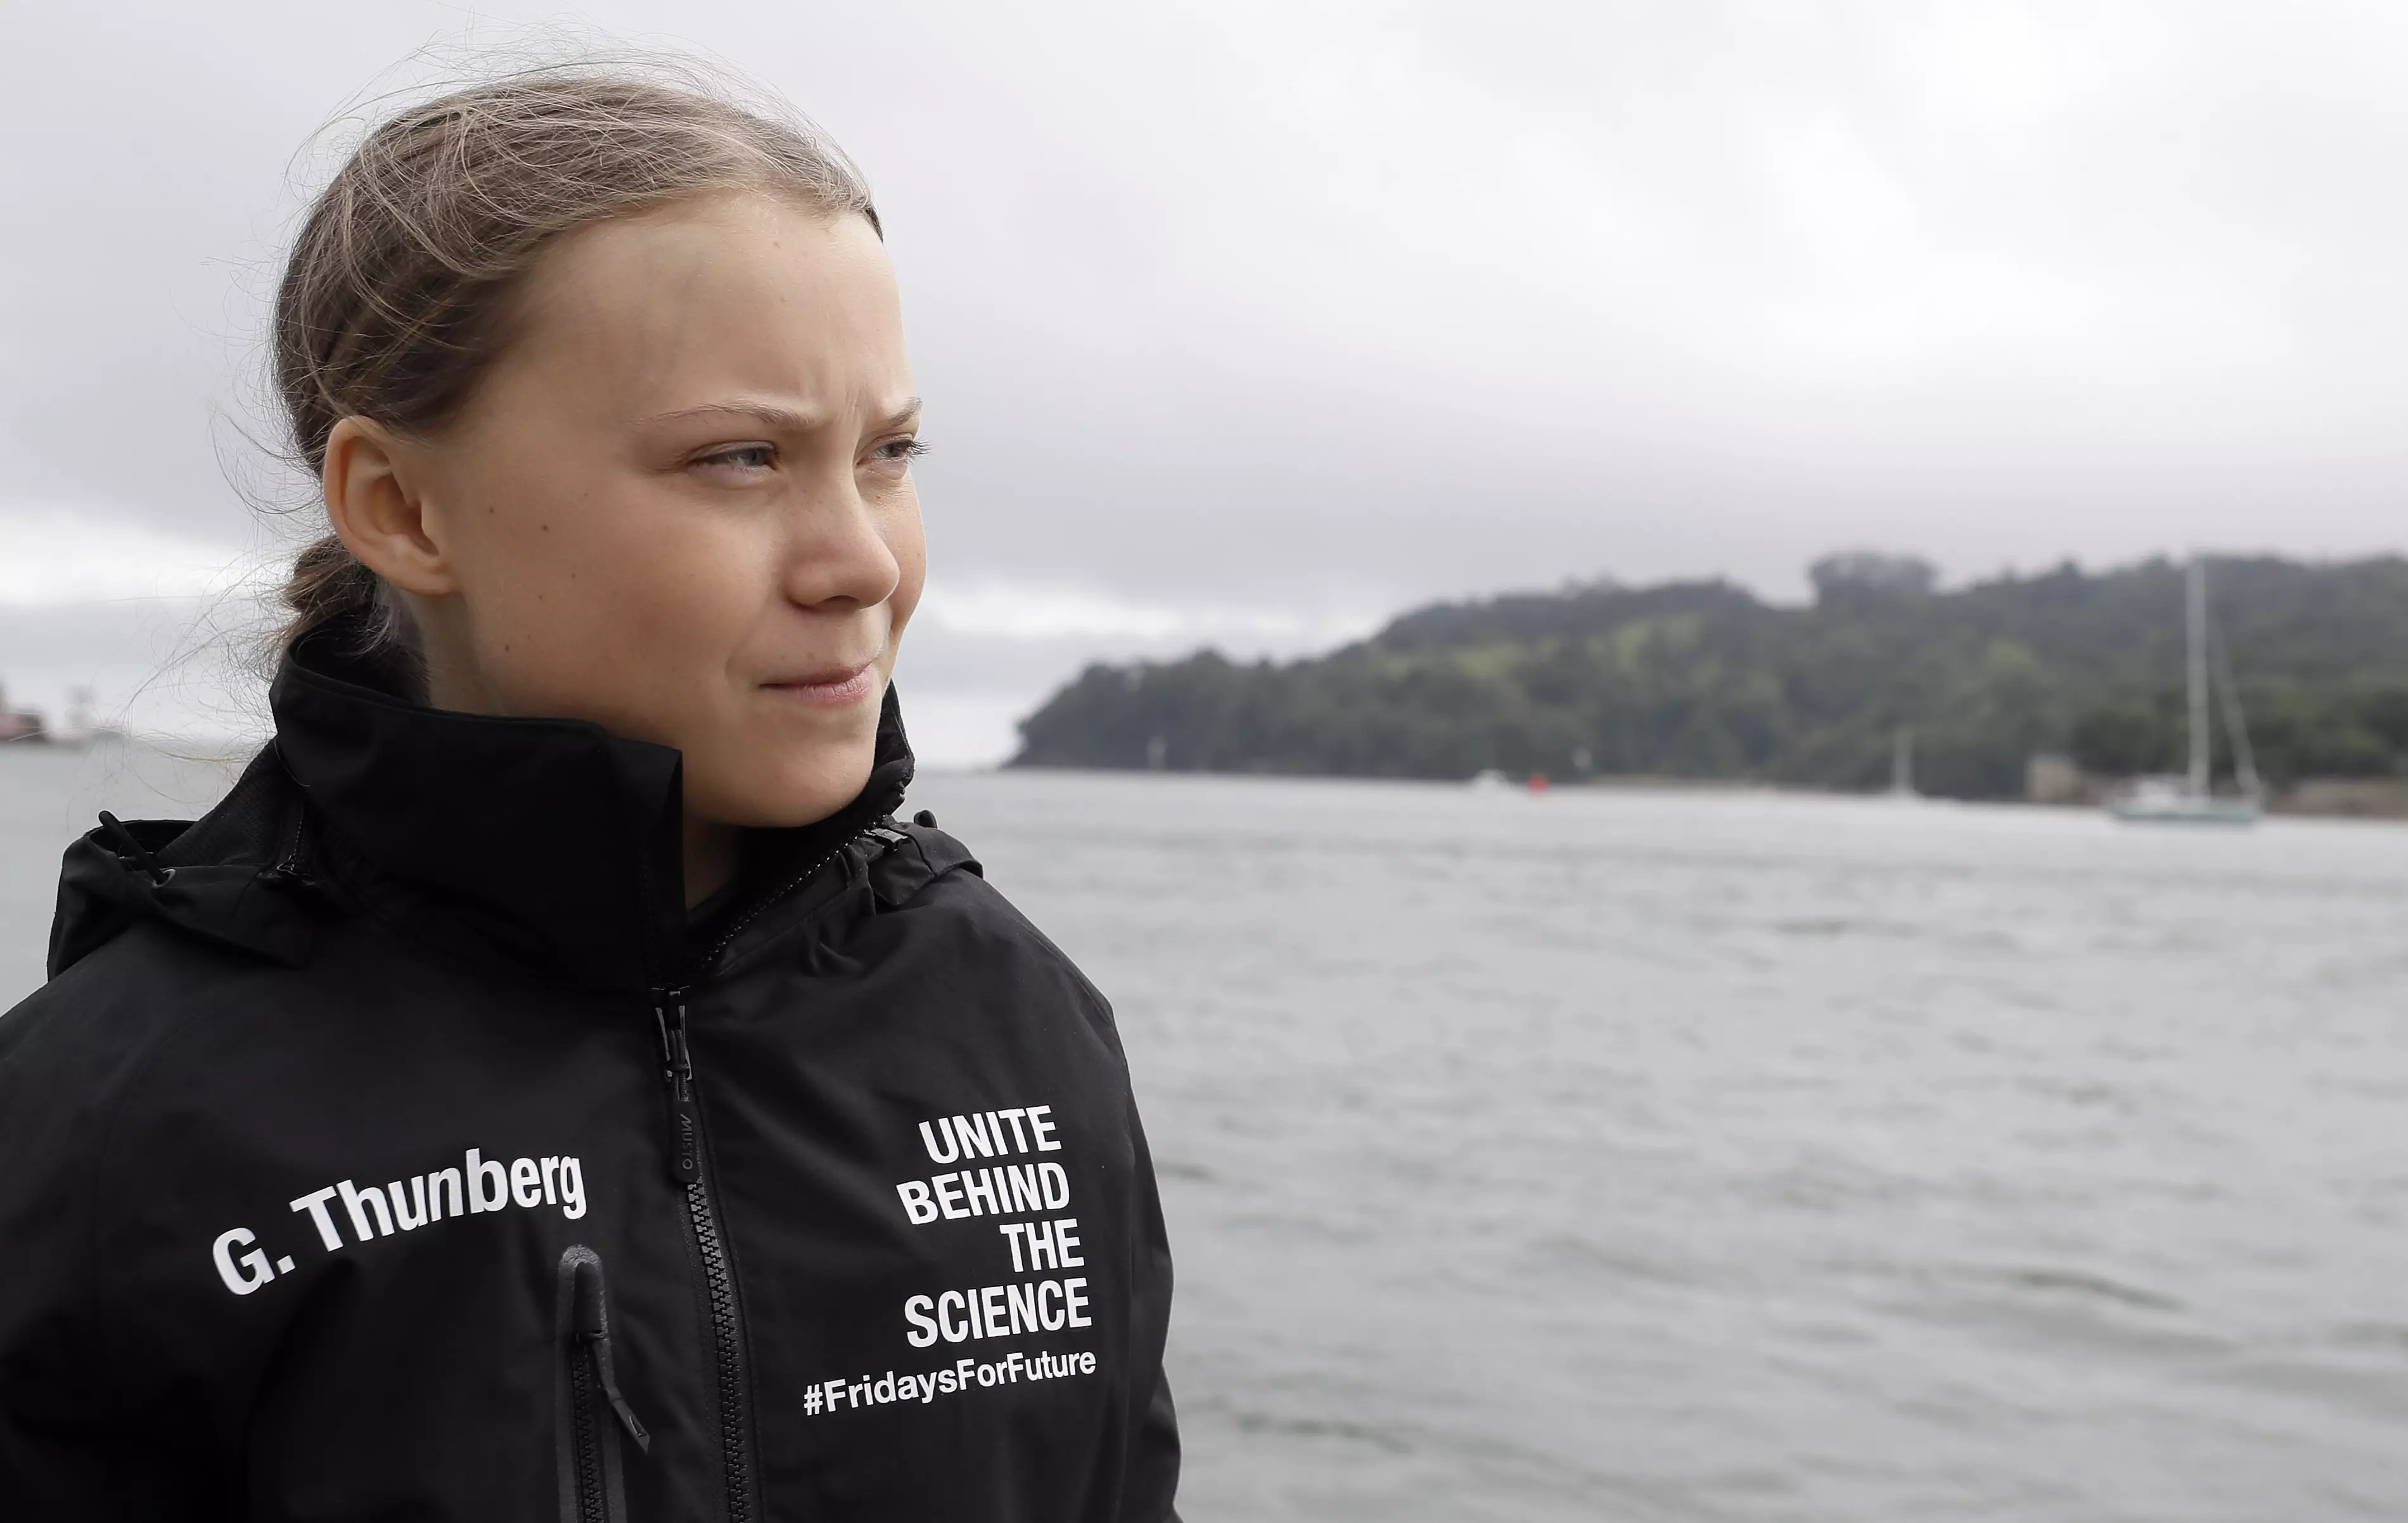 Greta has been outspoken about the effect that climate change will have on her generation.